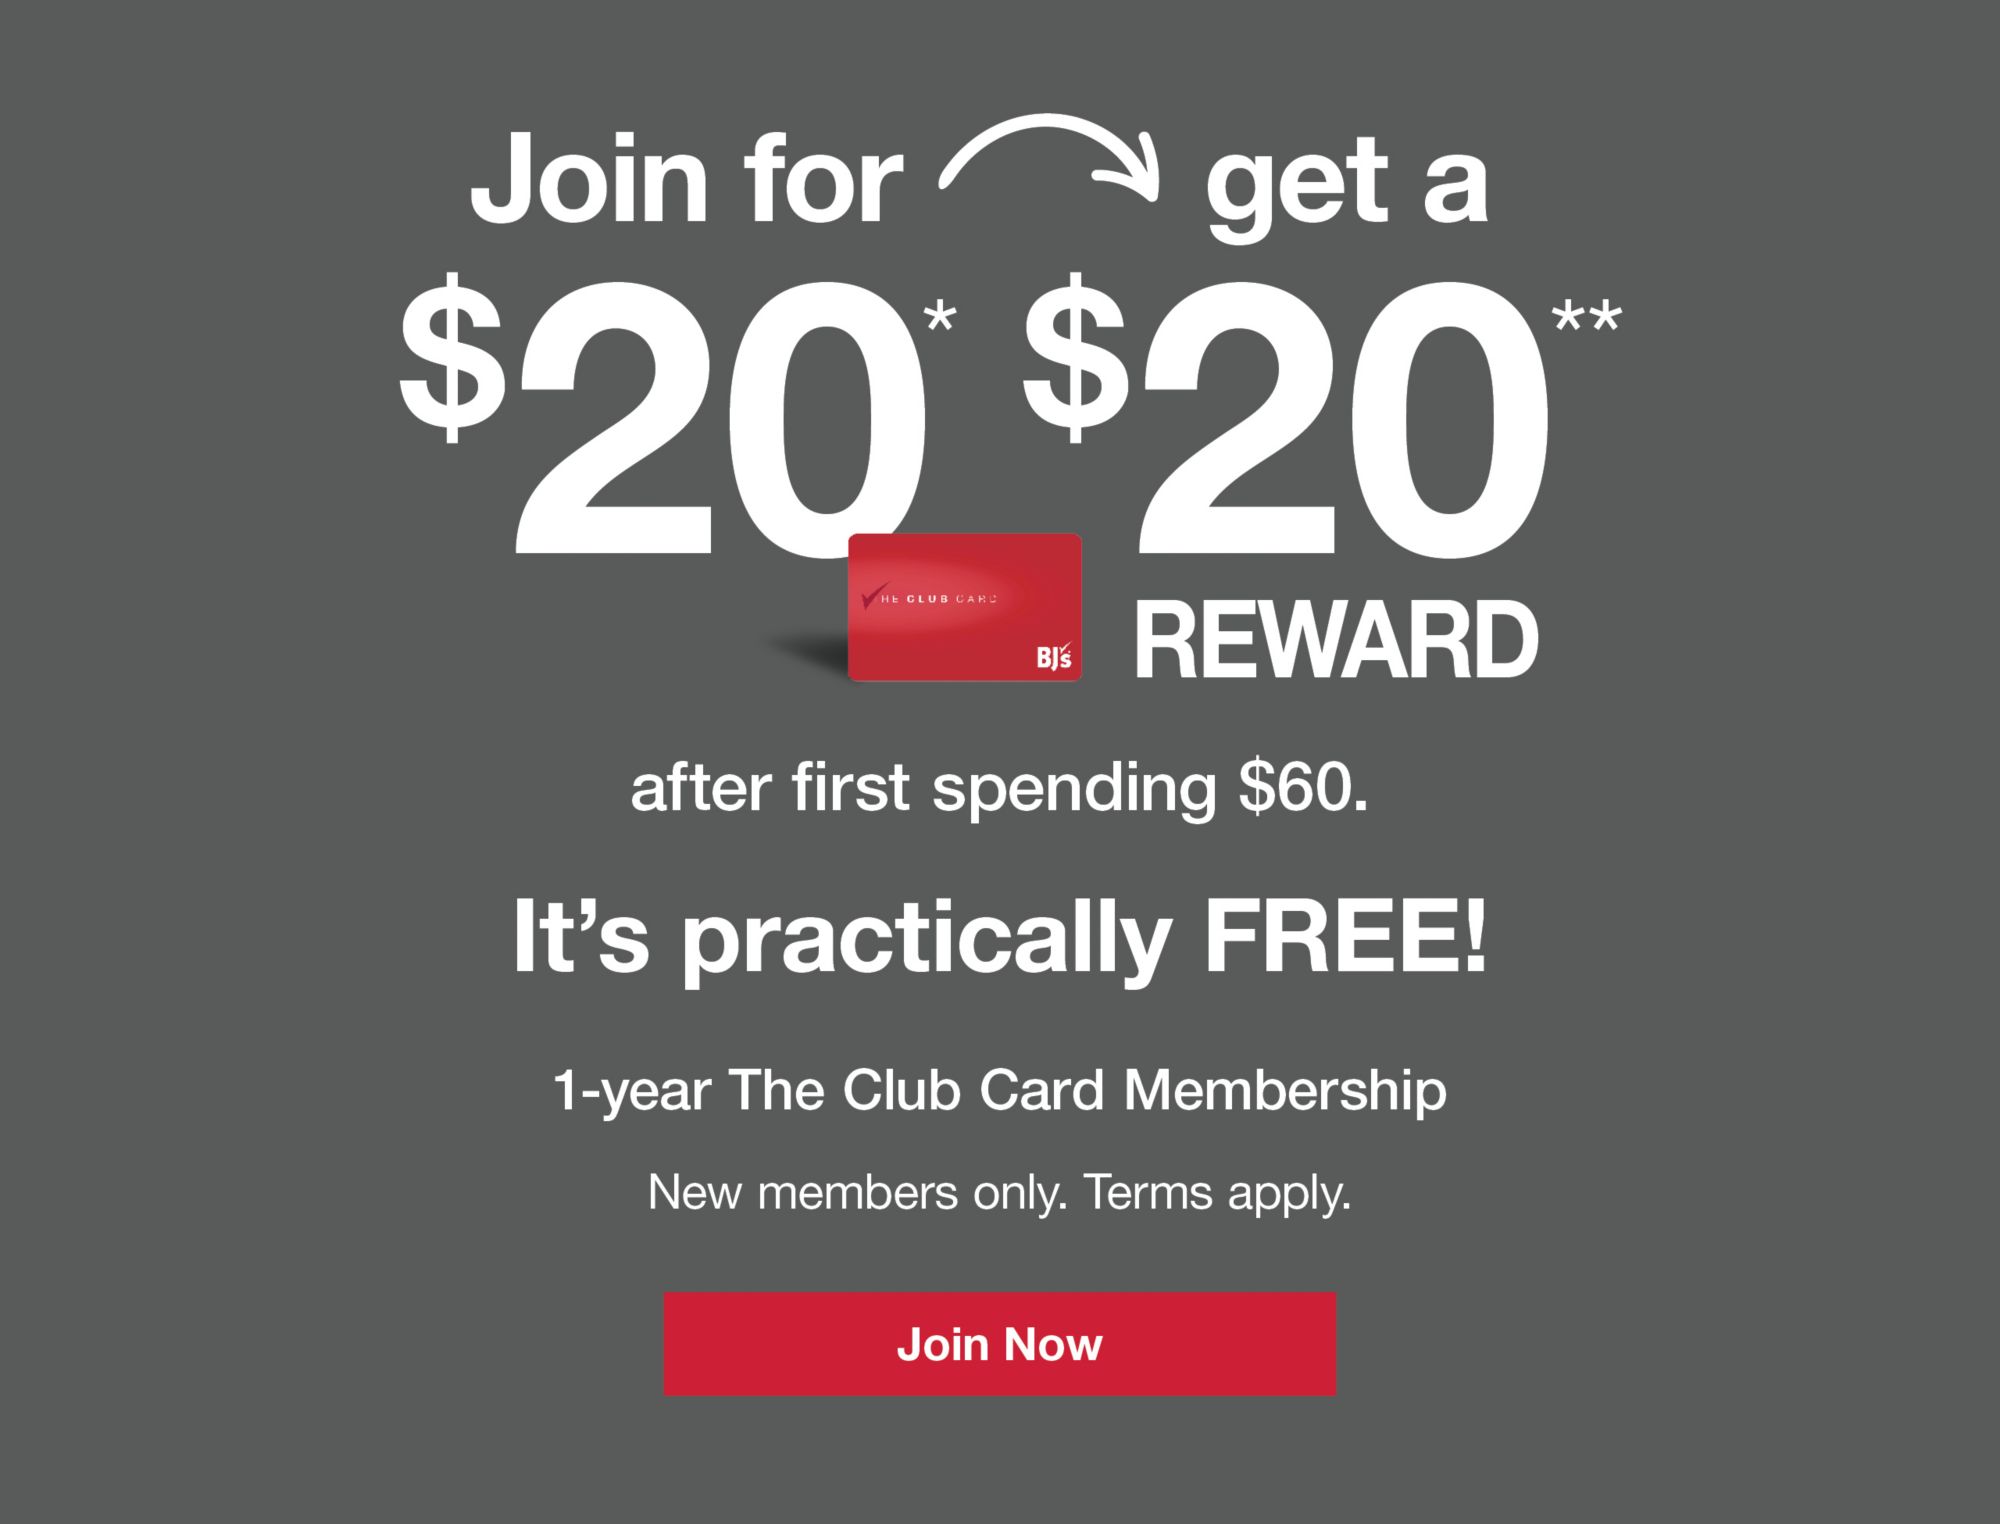 BJ's Wholesale on X: Get rewarded when you spend $100 on